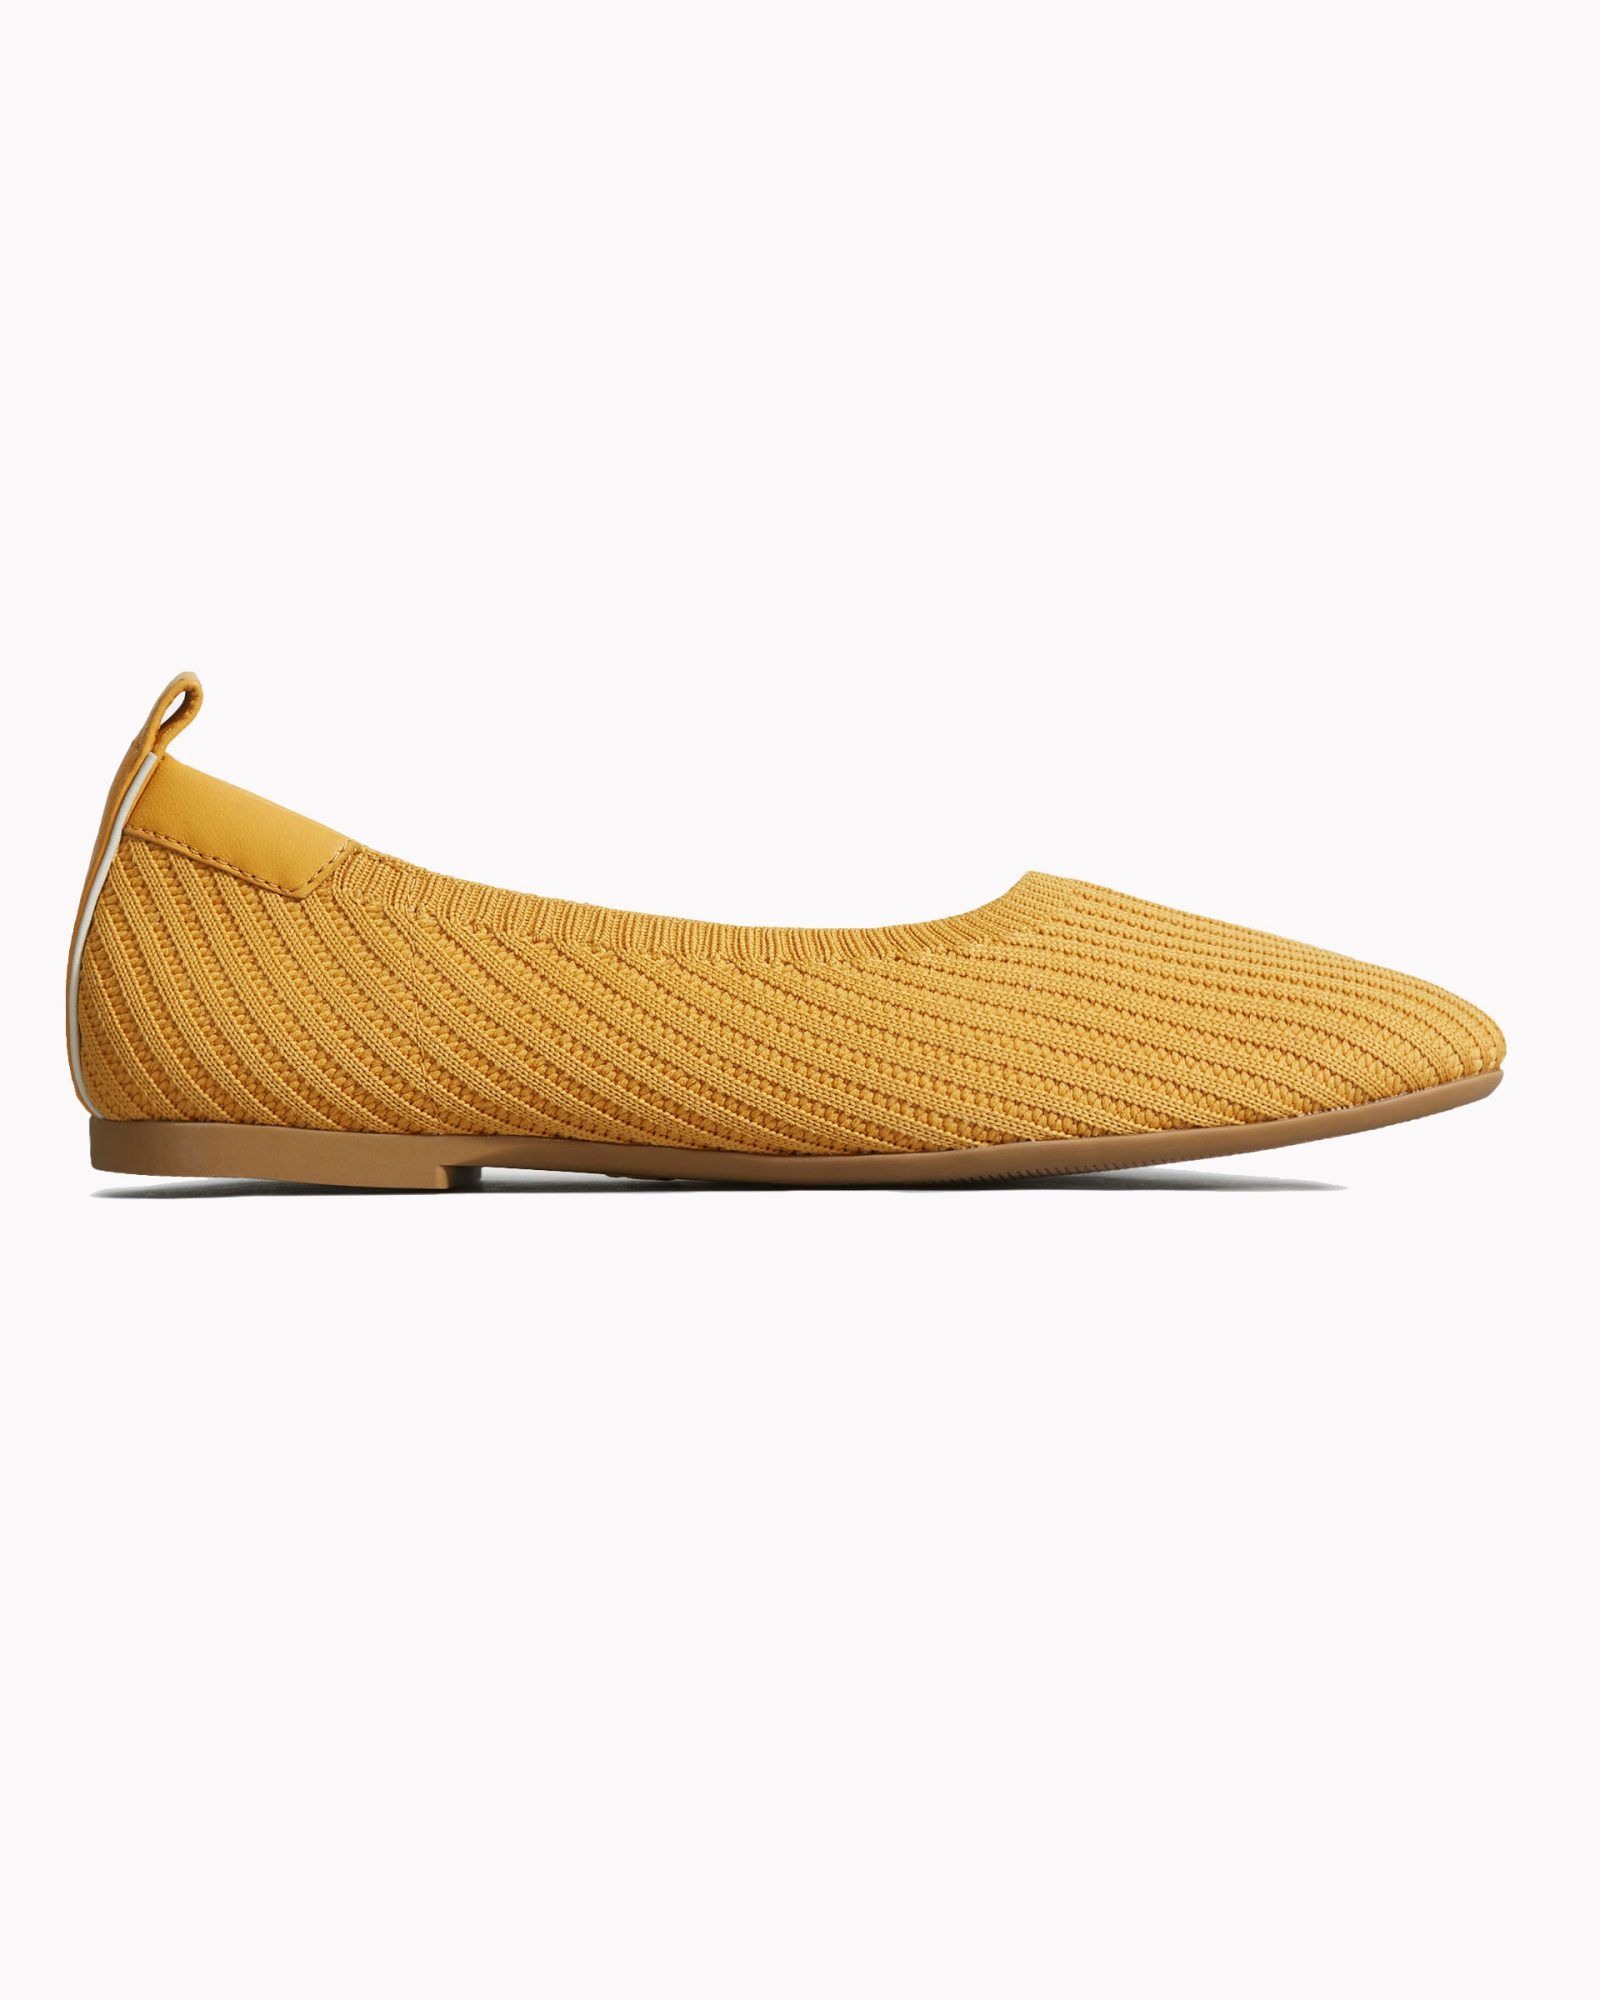 Everlane The Day Glove ReKnit: Best Walking Shoes for Women